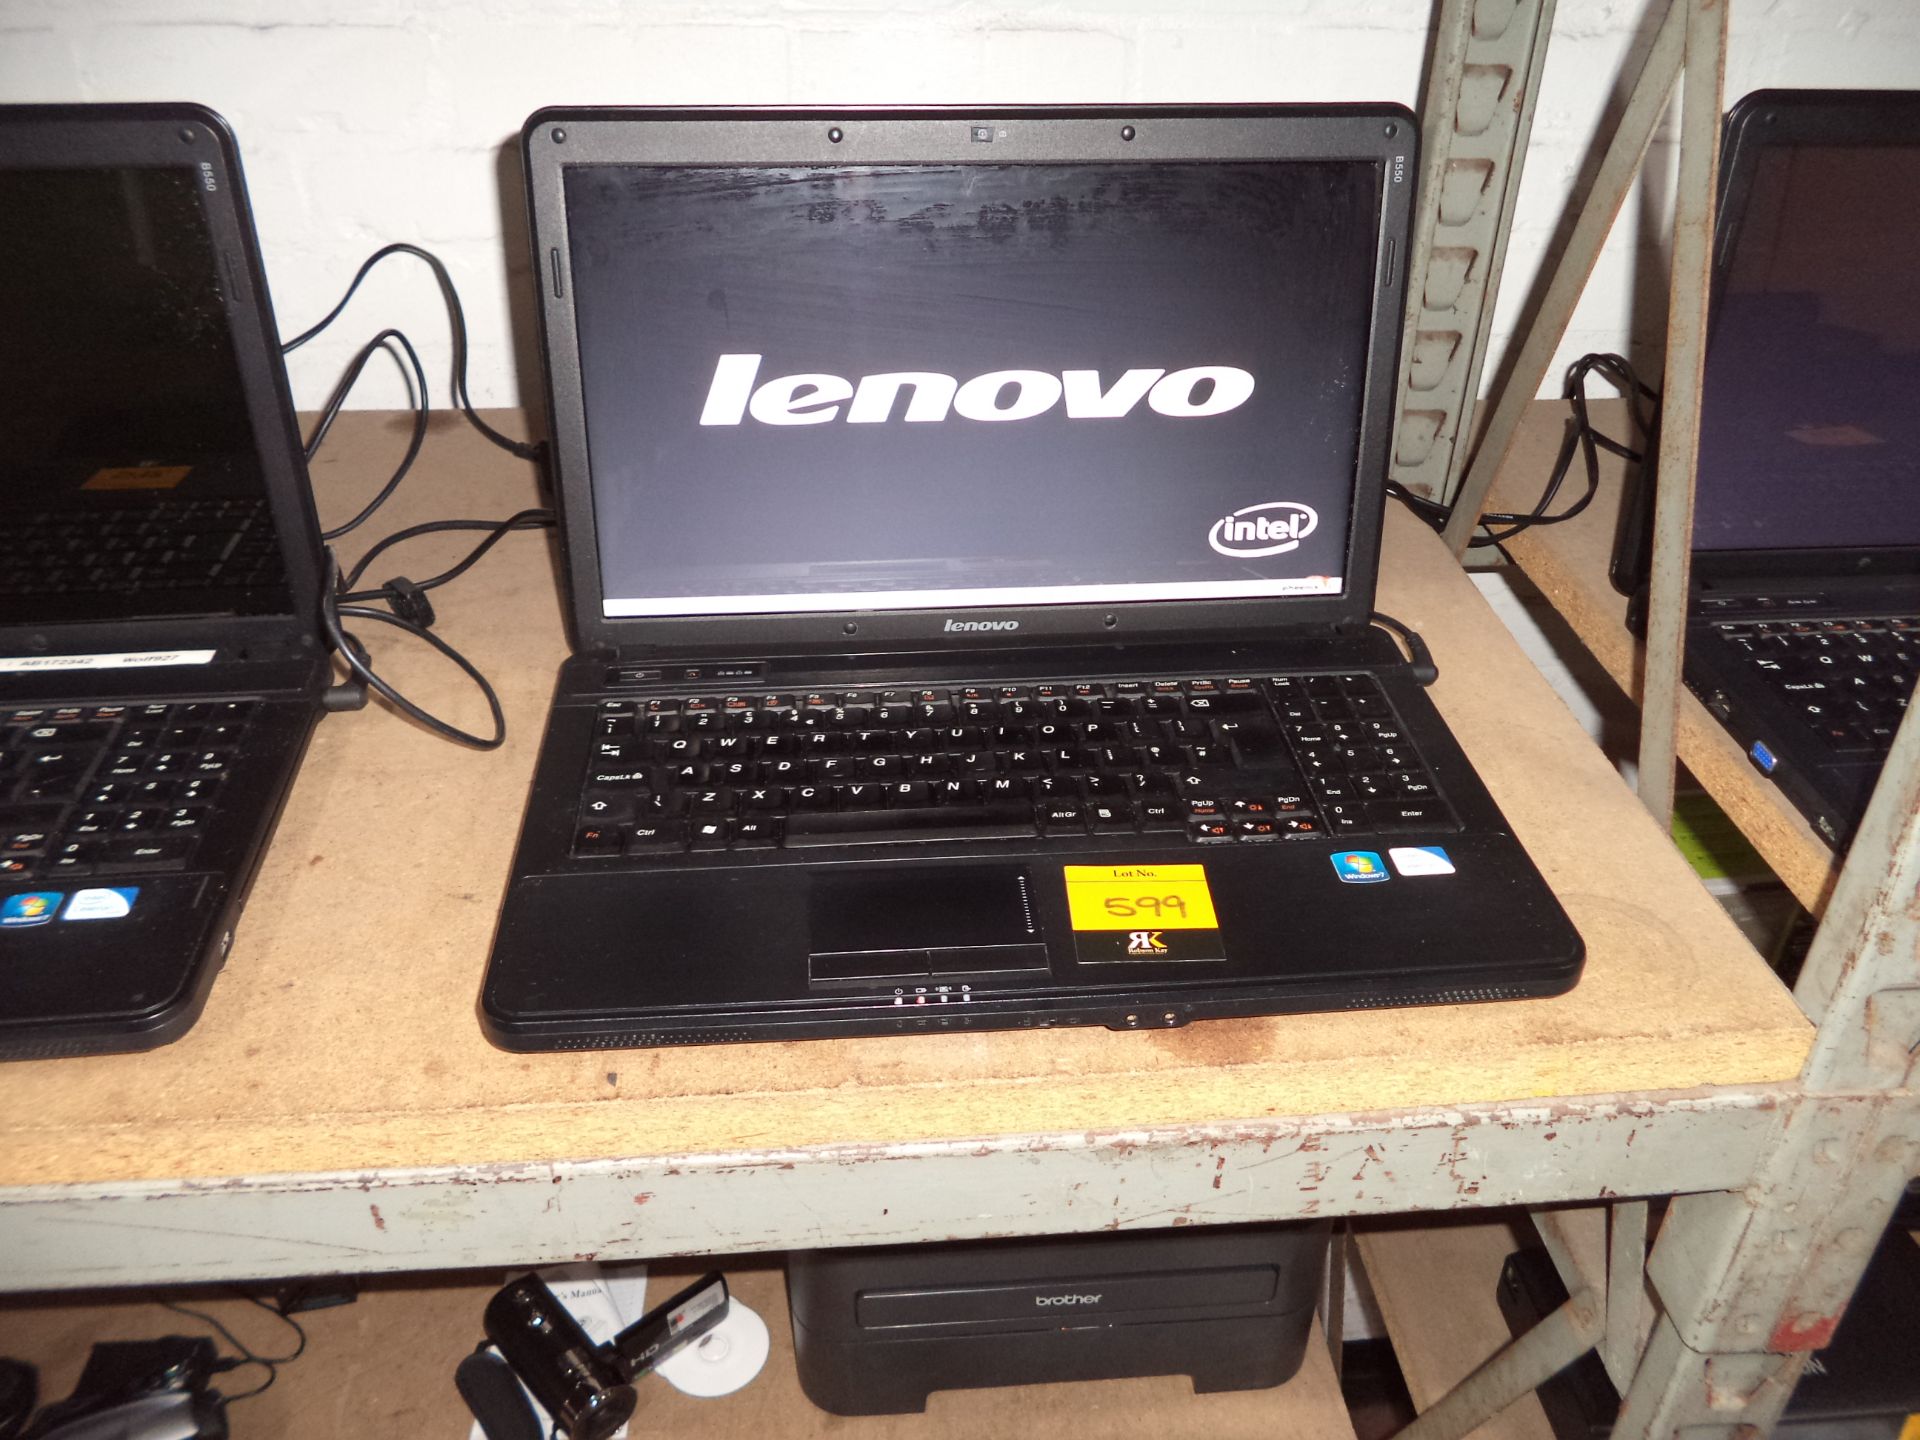 Lenovo B550 notebook computer with built-in 15.6" widescreen display & webcam plus DVD writer,